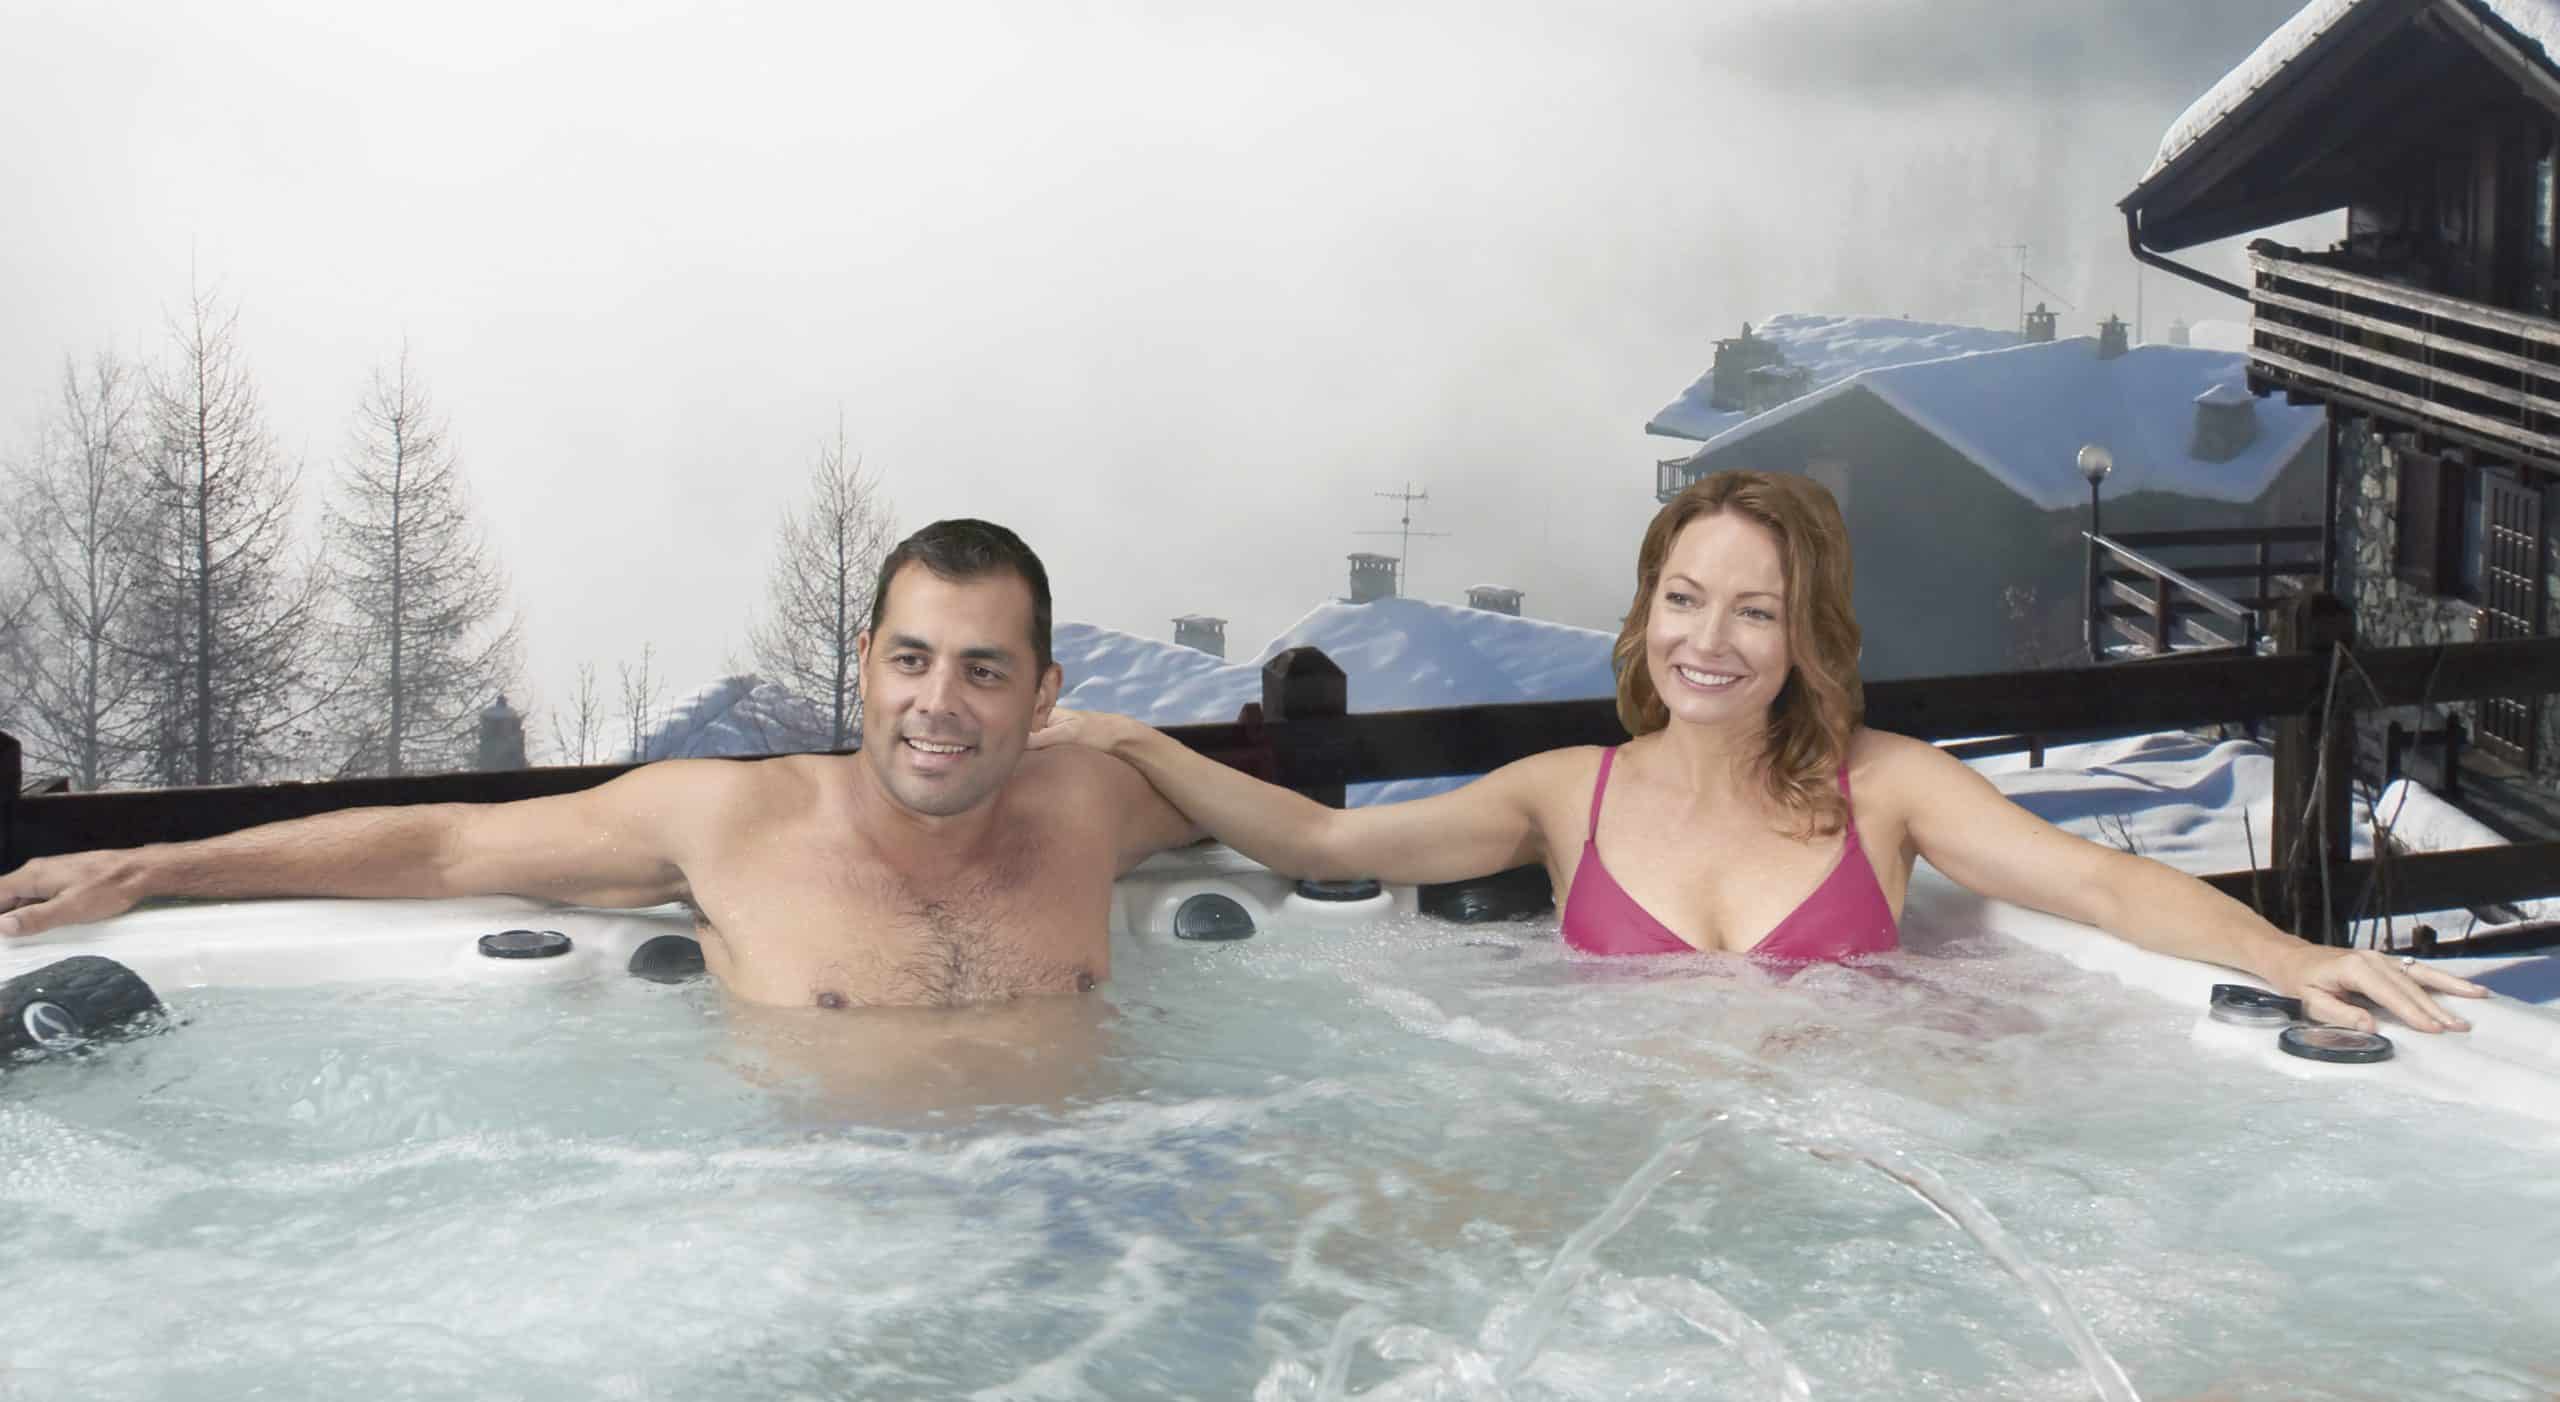 How To Plan A Romantic Valentine's Date: Hot Tub Style-Valentine’sDay-couple - image